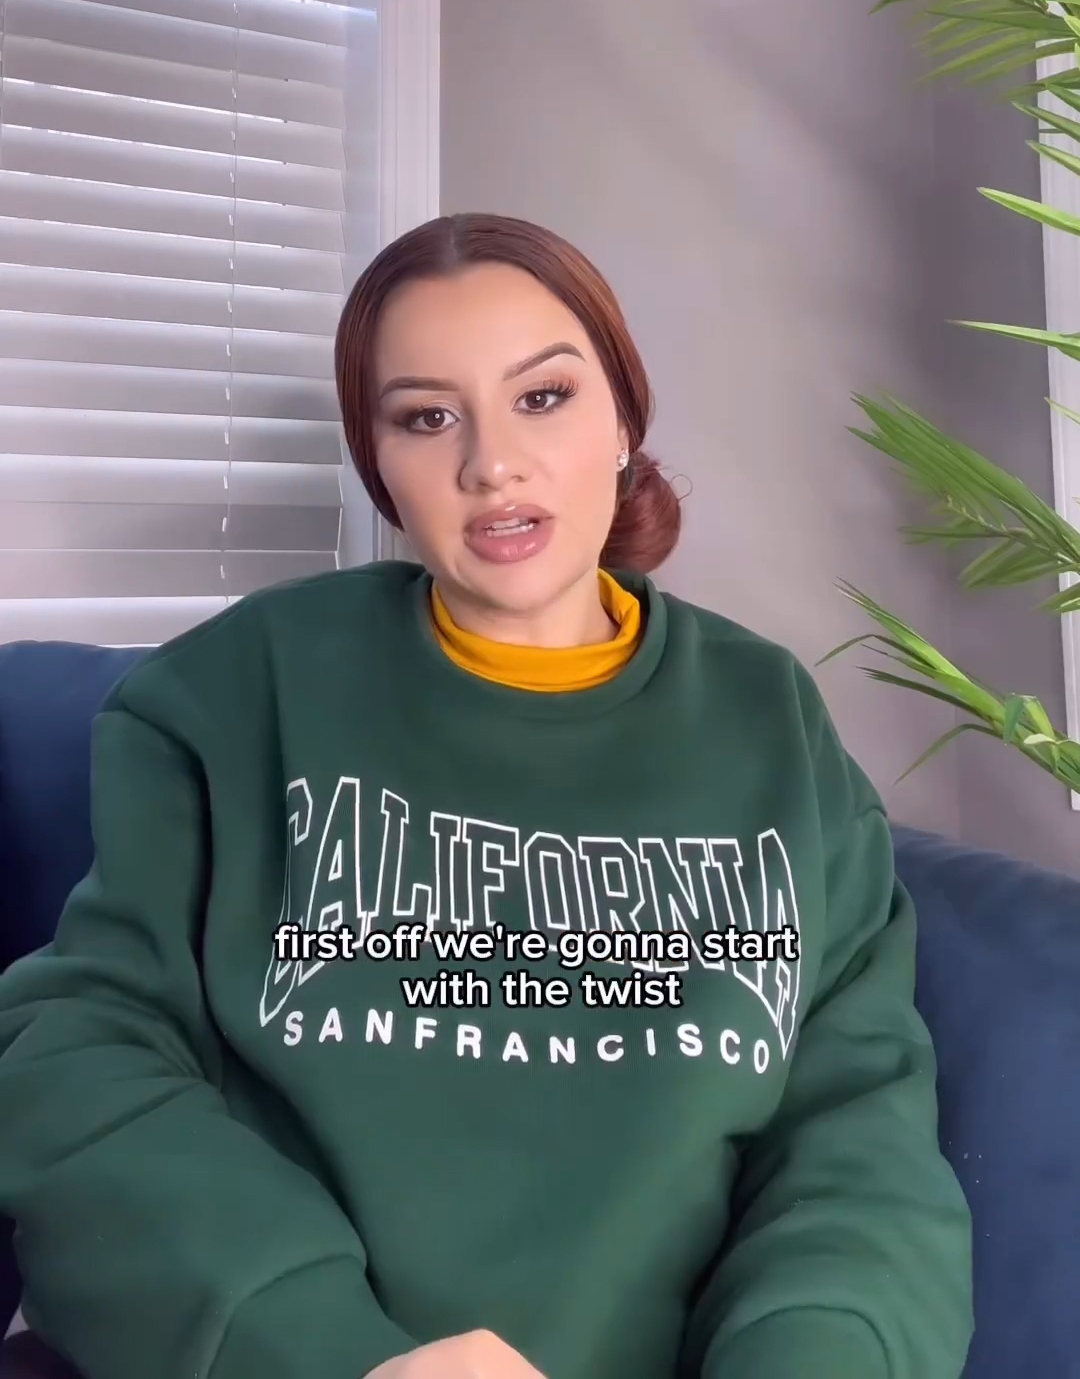 Kayla recently fueled rumors when she covered her belly in an oversized sweatshirt in another post online